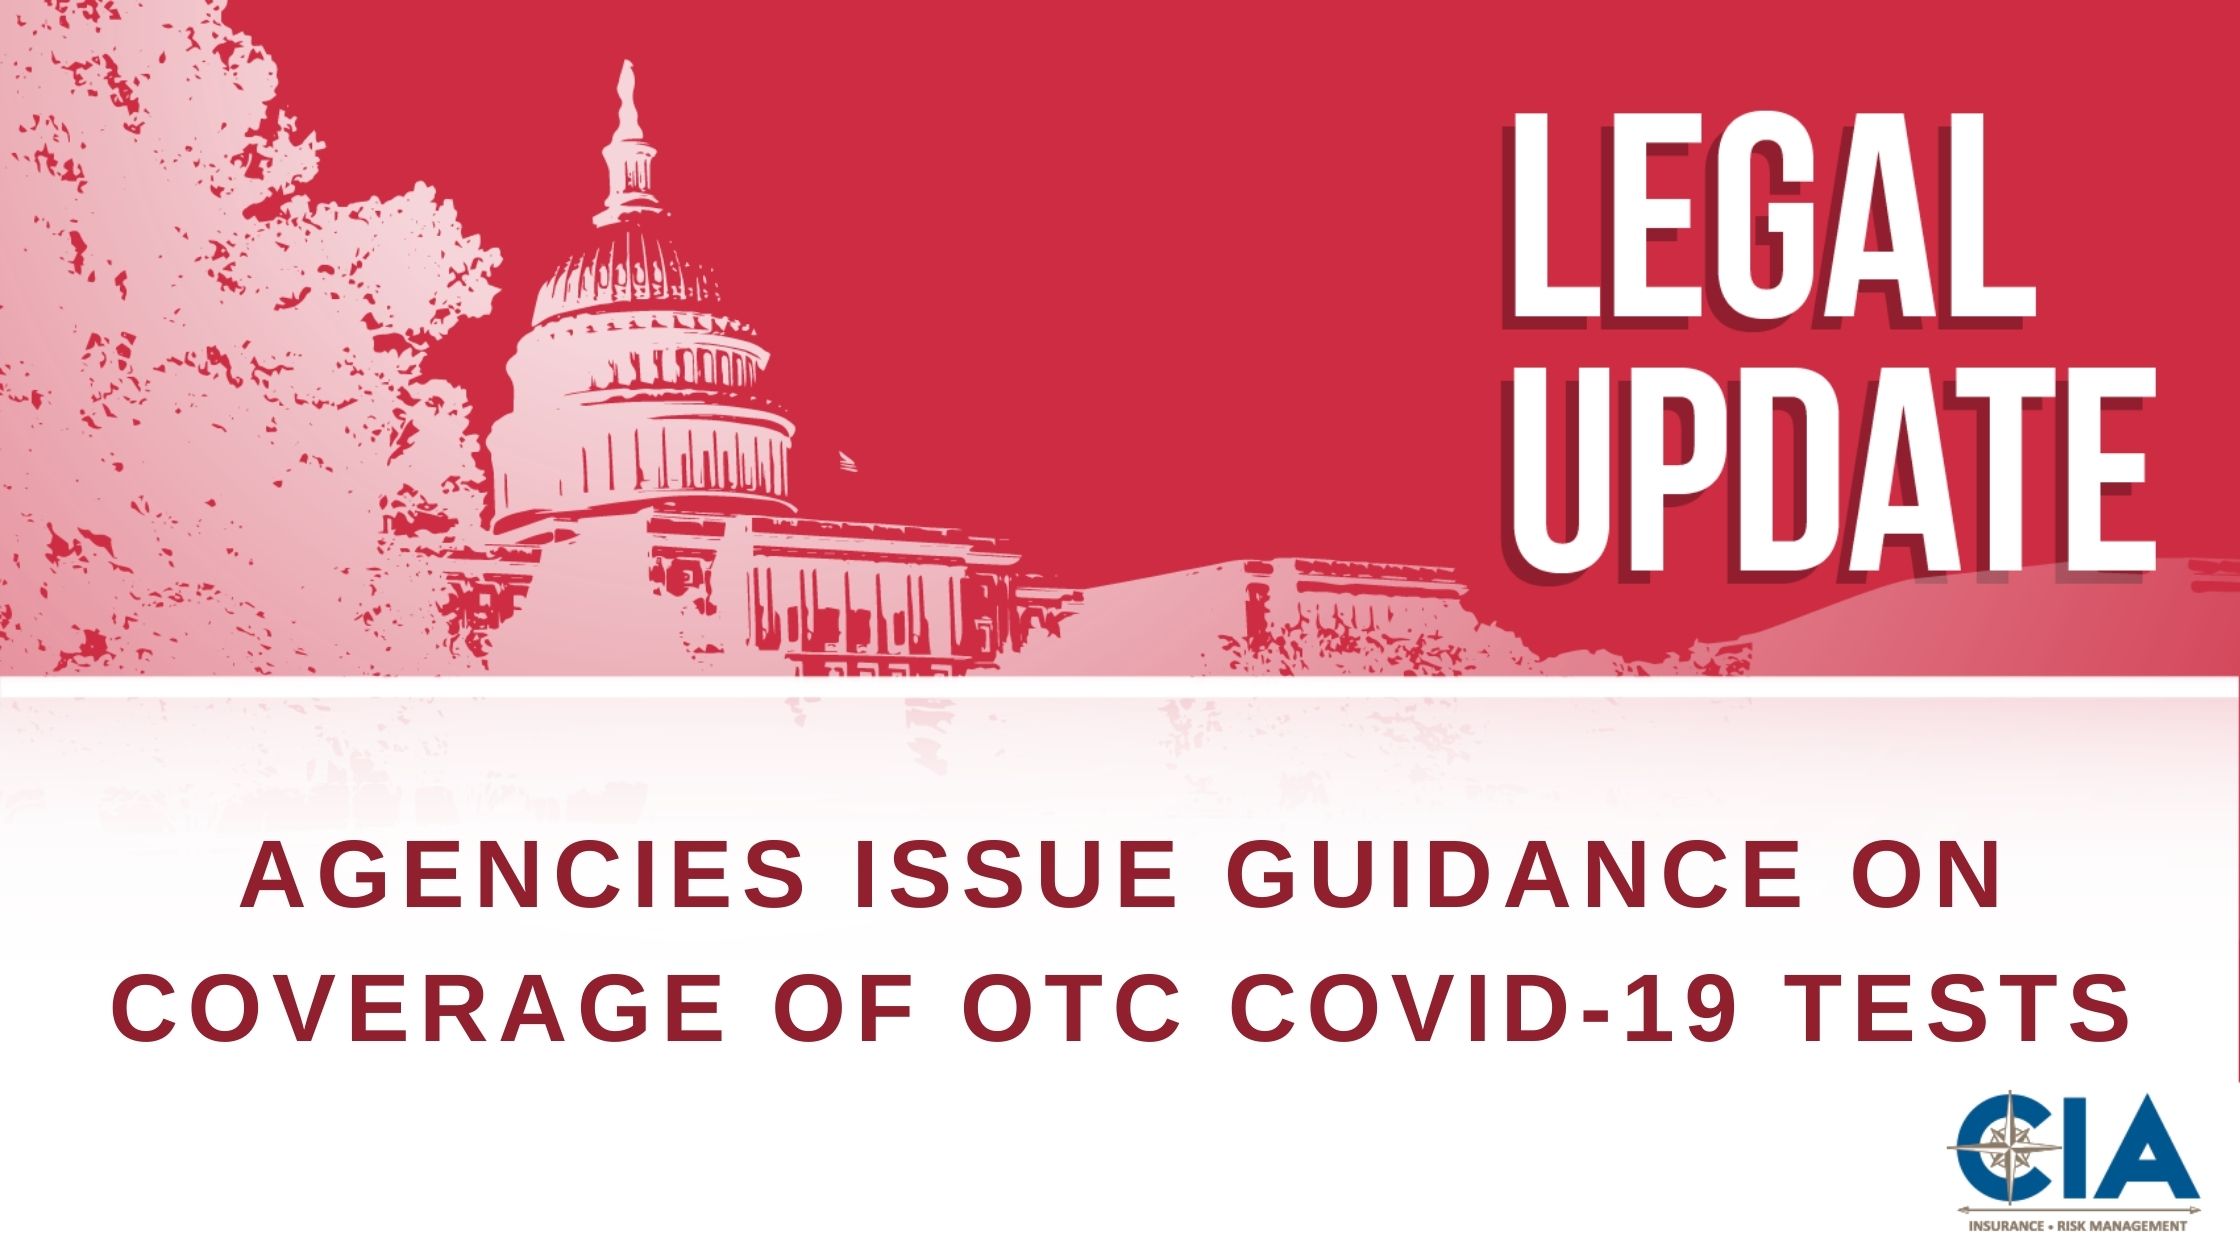 Agencies Issue Guidance on Coverage of OTC COVID-19 Tests